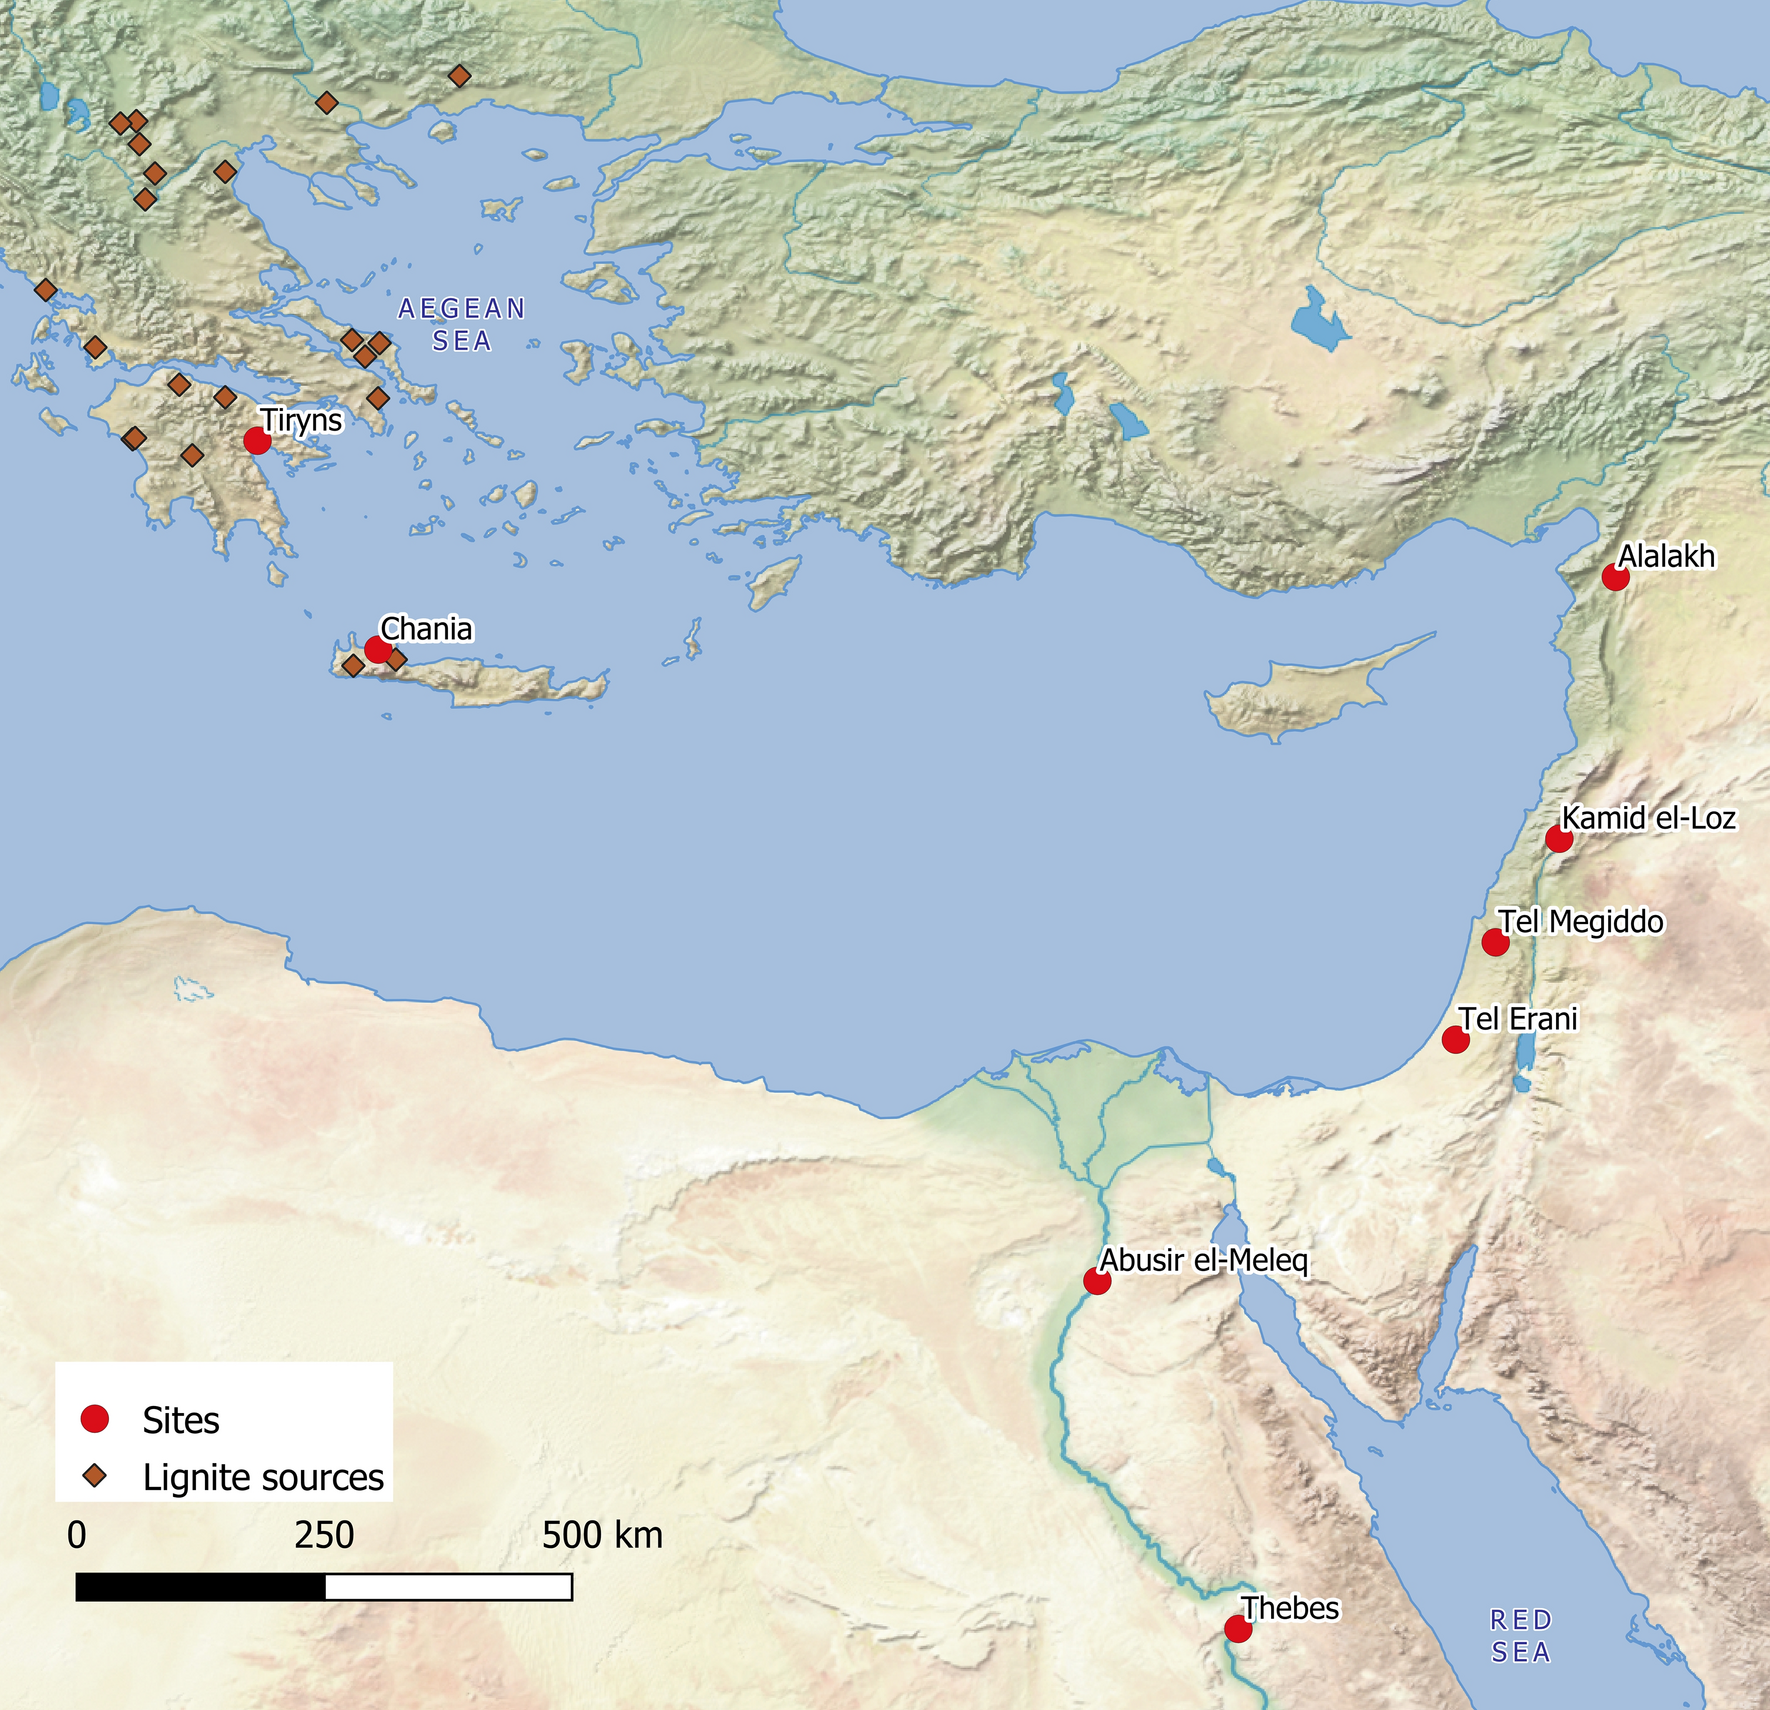 Archaeometric evidence for the earliest exploitation of lignite from the  bronze age Eastern Mediterranean | Scientific Reports